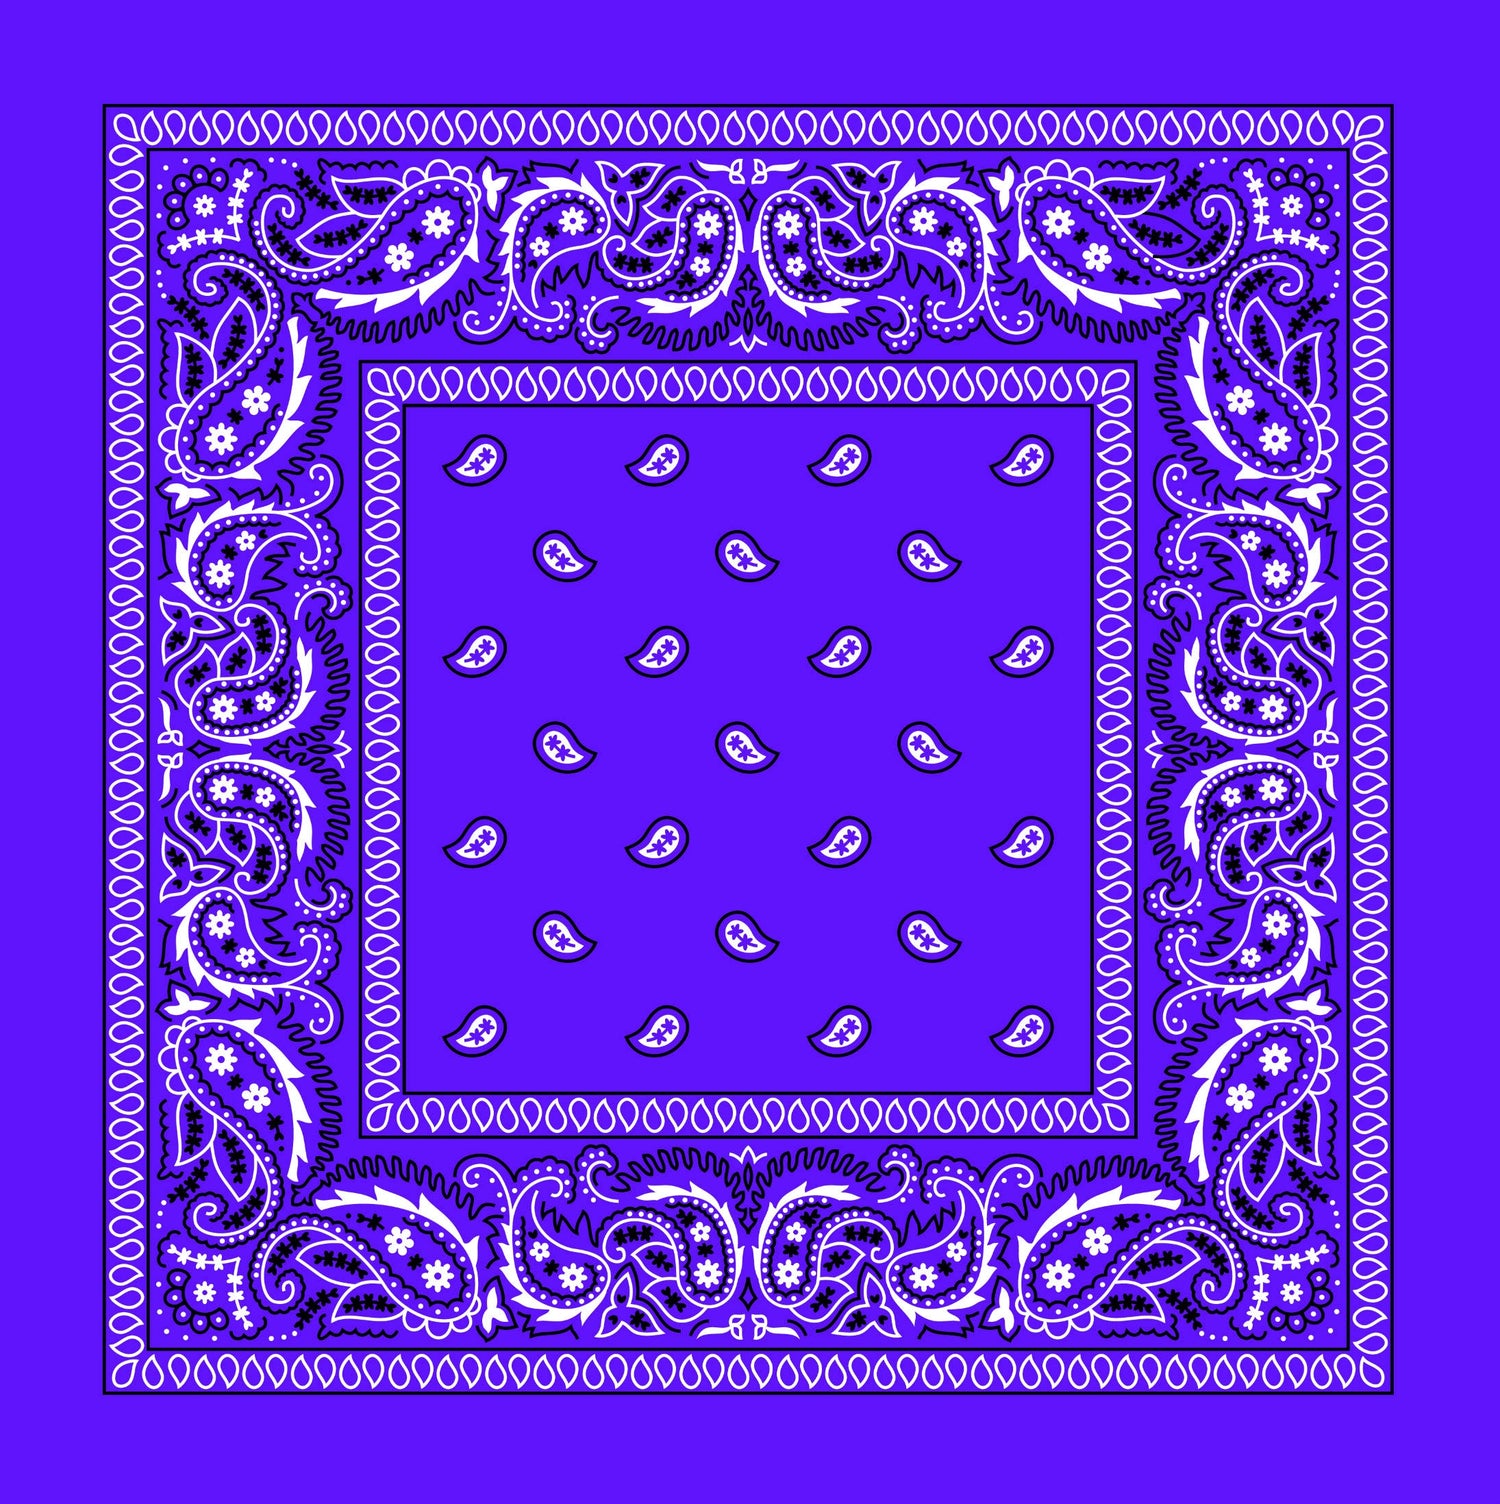 Purple Paisley Bandana, Satin or Poplin with Traditional Pattern for a Head Wrap or Neck Scarf